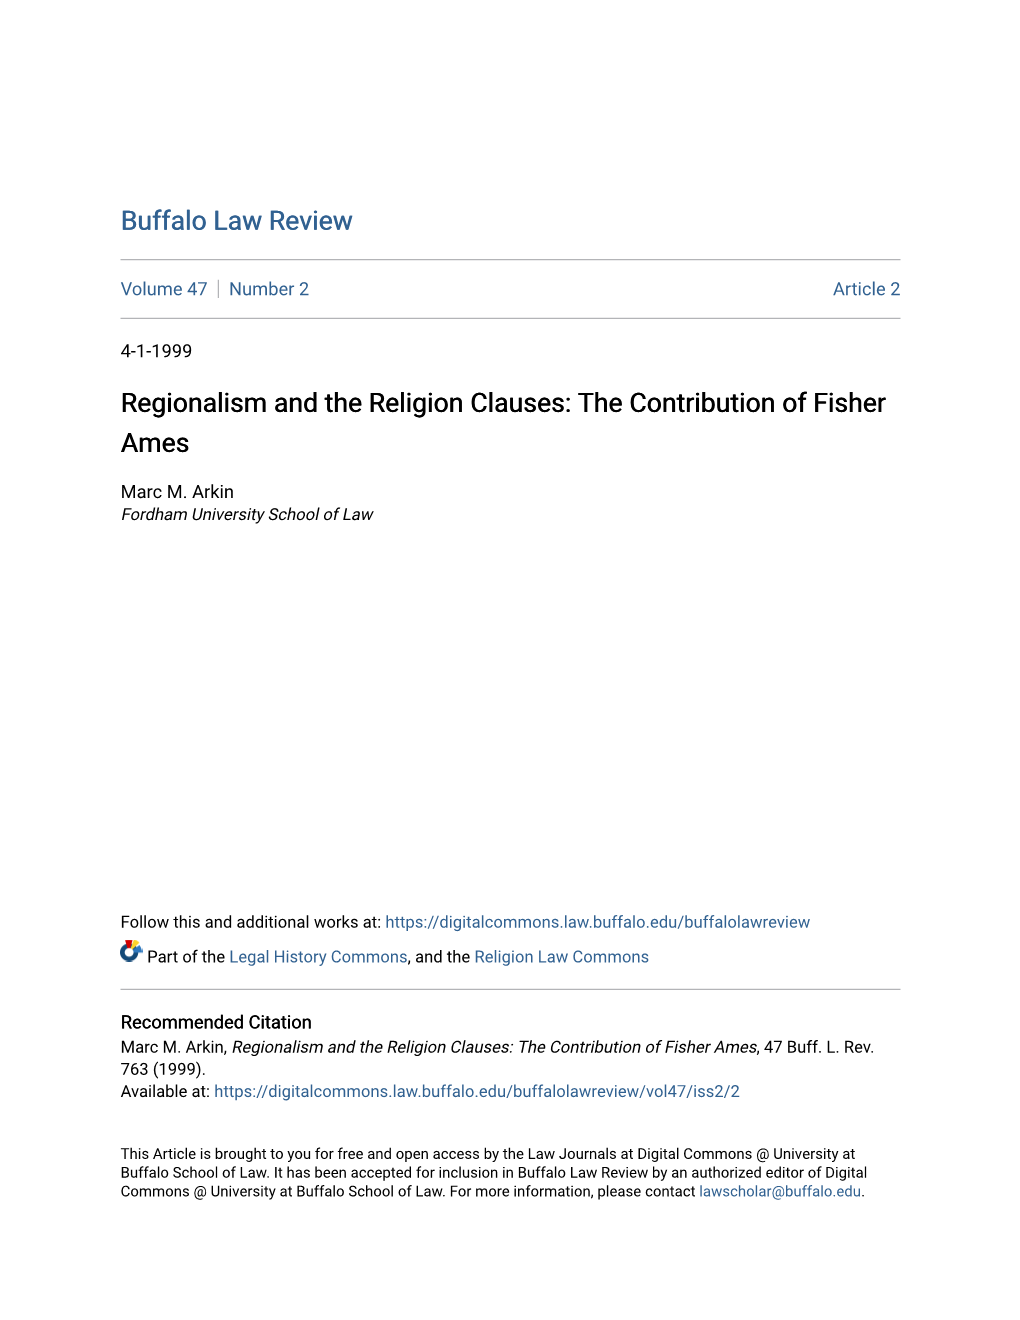 Regionalism and the Religion Clauses: the Contribution of Fisher Ames